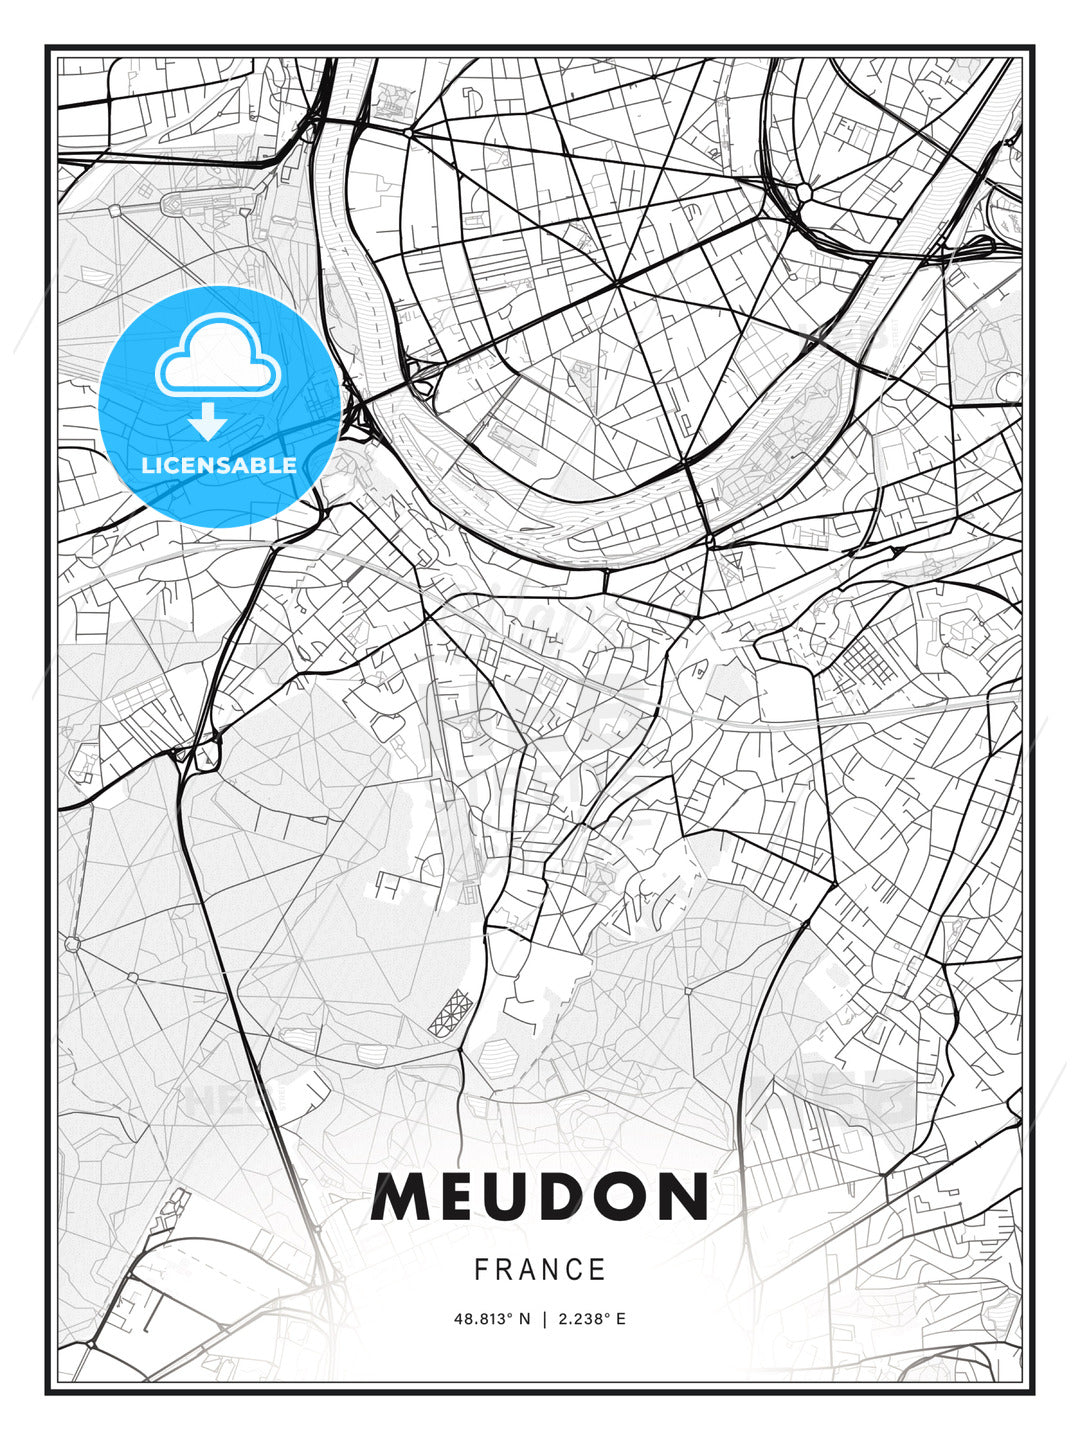 Meudon, France, Modern Print Template in Various Formats - HEBSTREITS Sketches